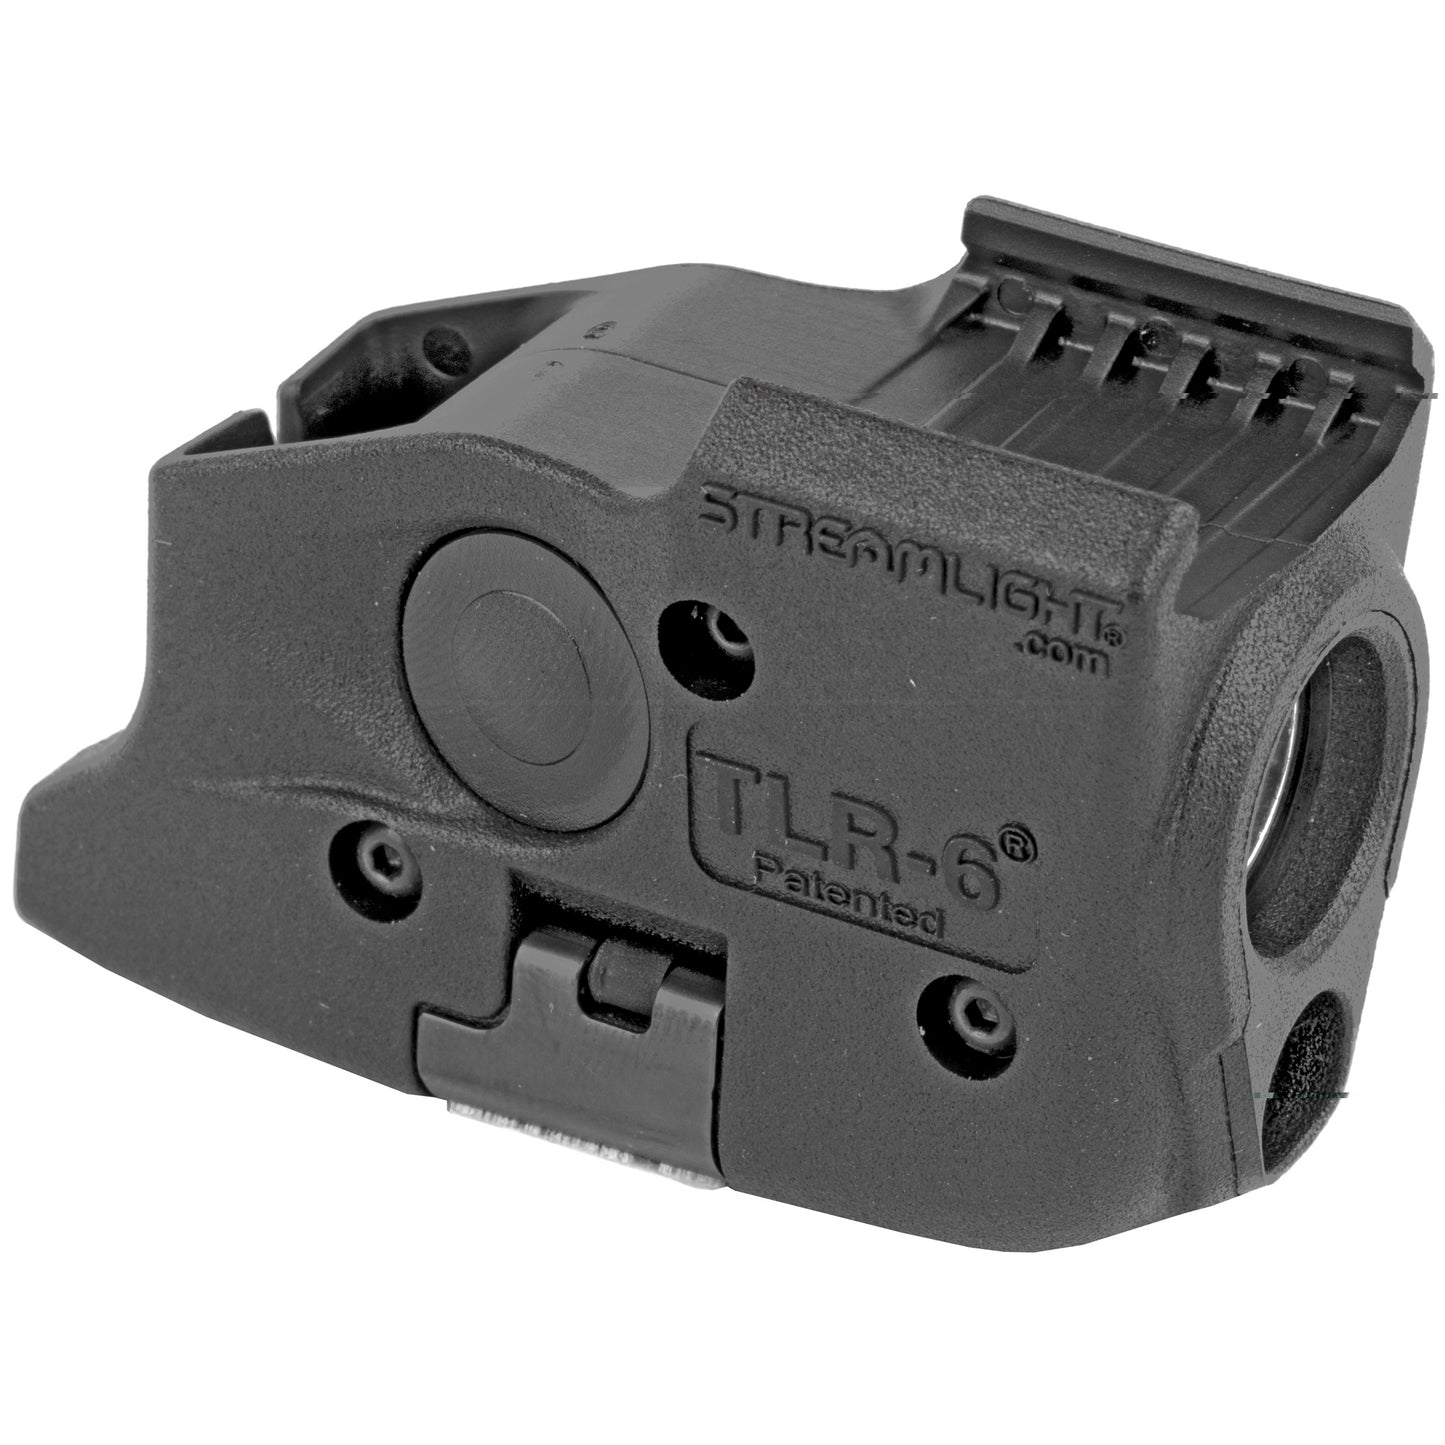 Streamlight, TLR-6, Fits Glock 17/22 and 19/23, Black, White LED and Red Laser, 100 Lumens, Includes 2 CR 1/3N Lithium Batteries